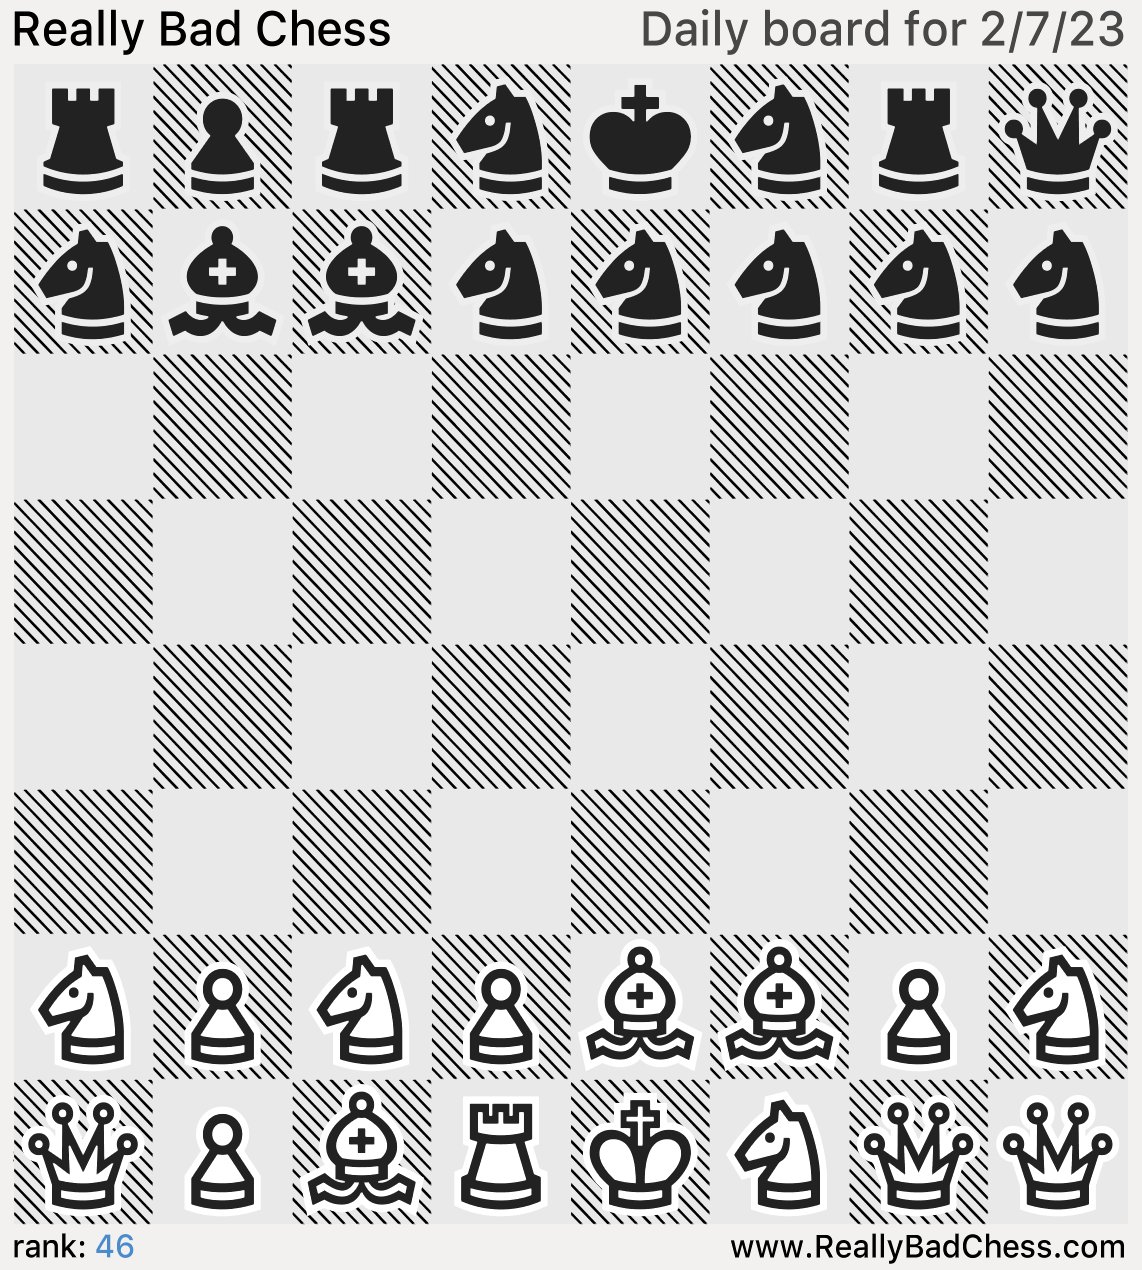 Really Bad Chess where chess pieces are randomly placed every